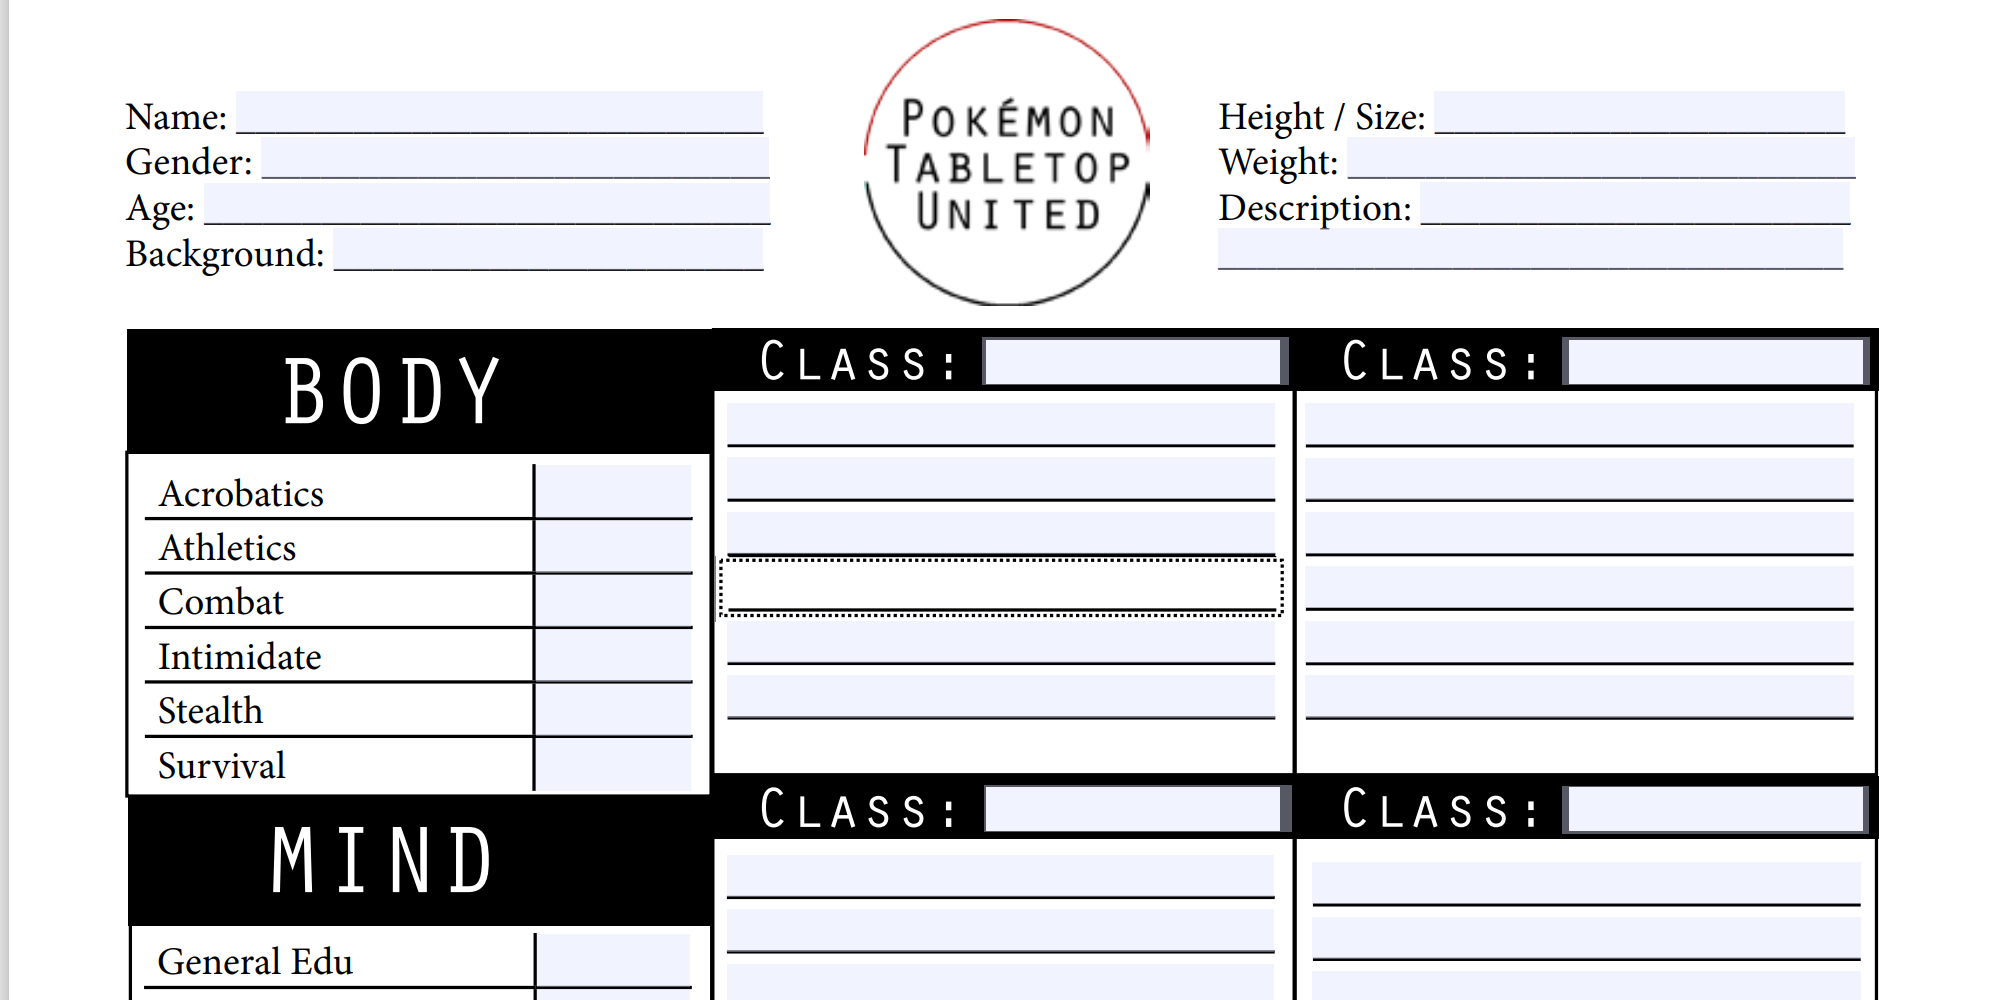 Pokemon Tabletop United Character Sheet Mind and Body and Classes